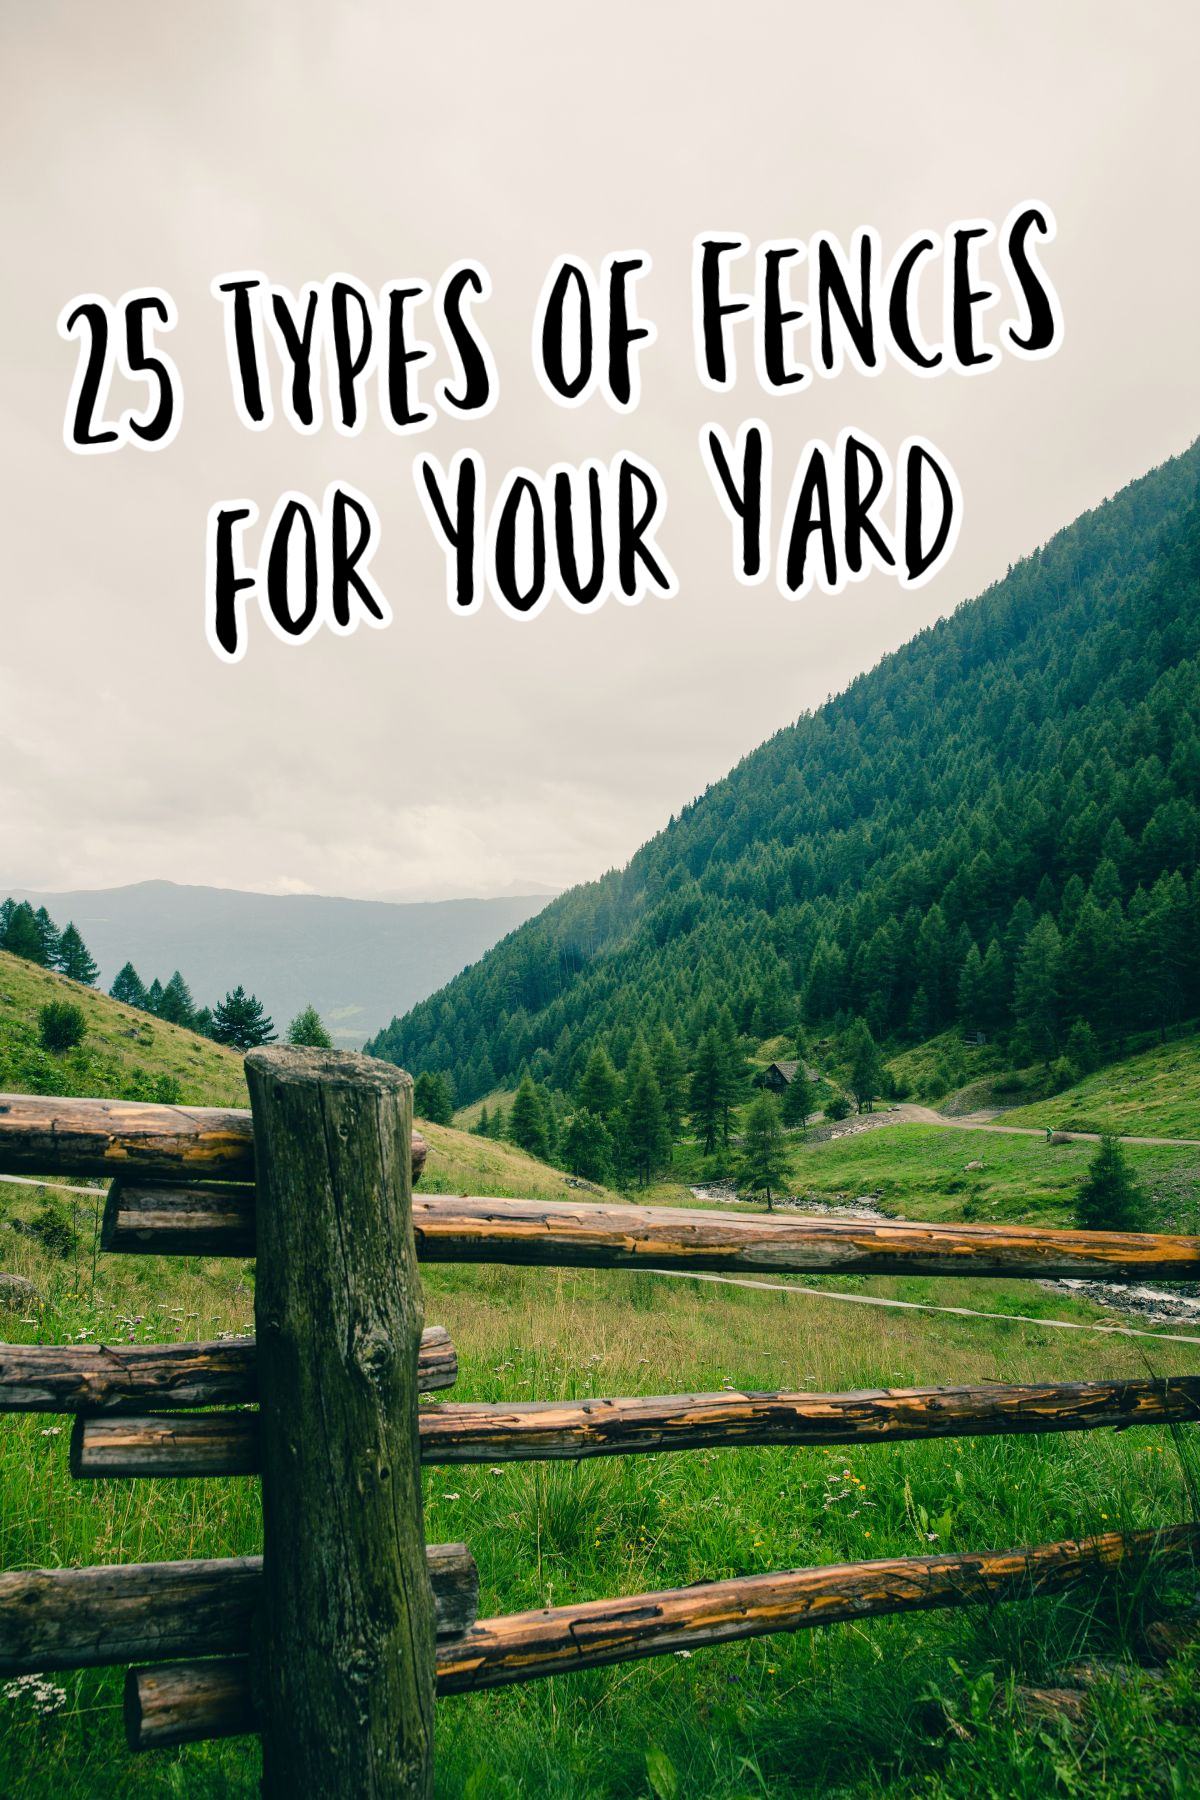 25 Types of Fences for Your Yard